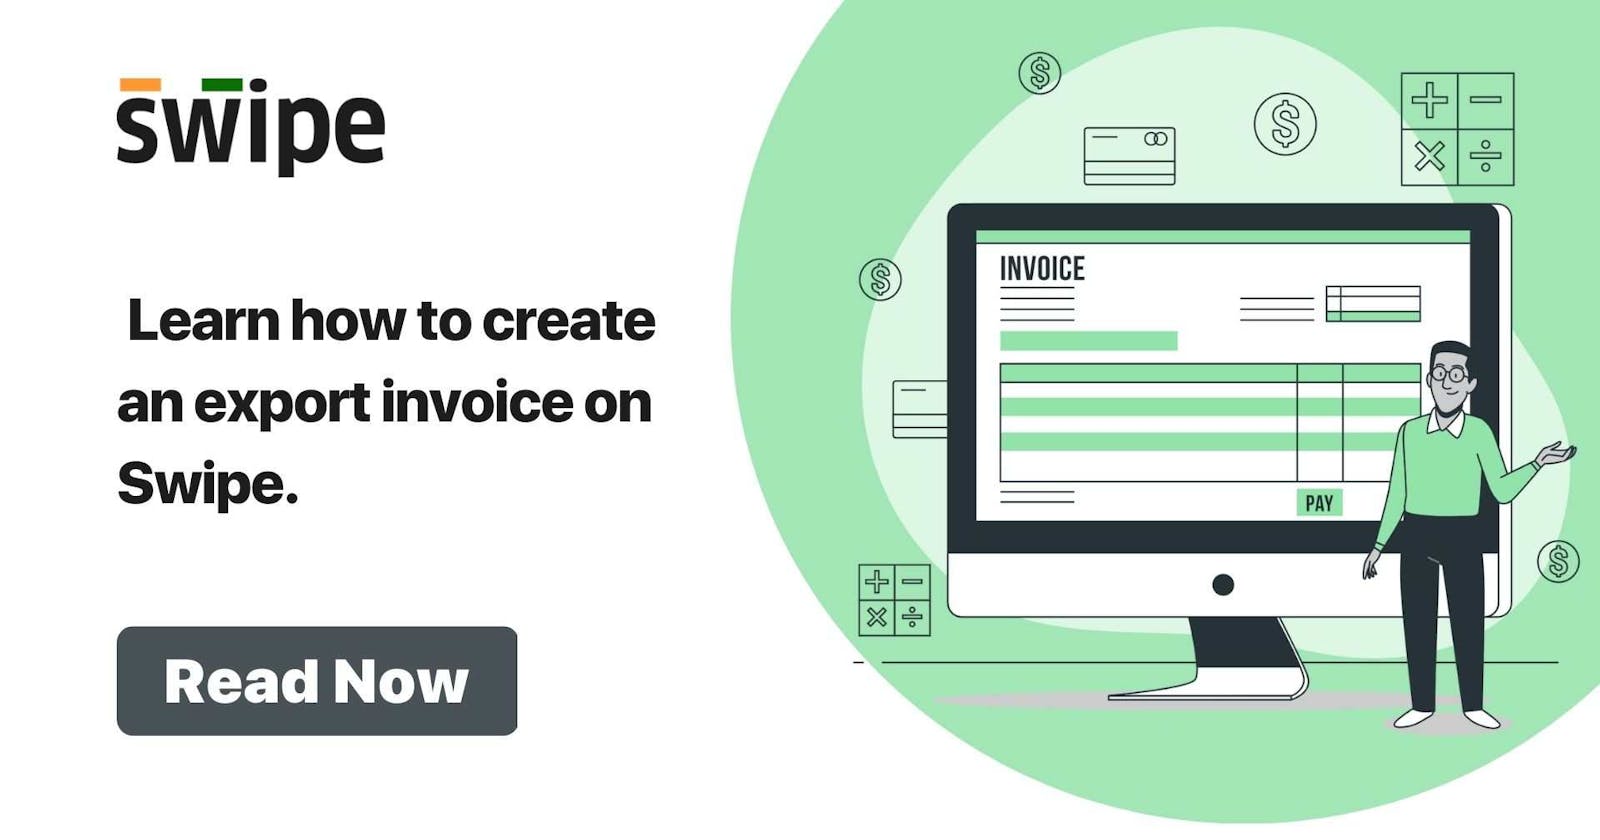 Learn how to create an export invoice on Swipe.